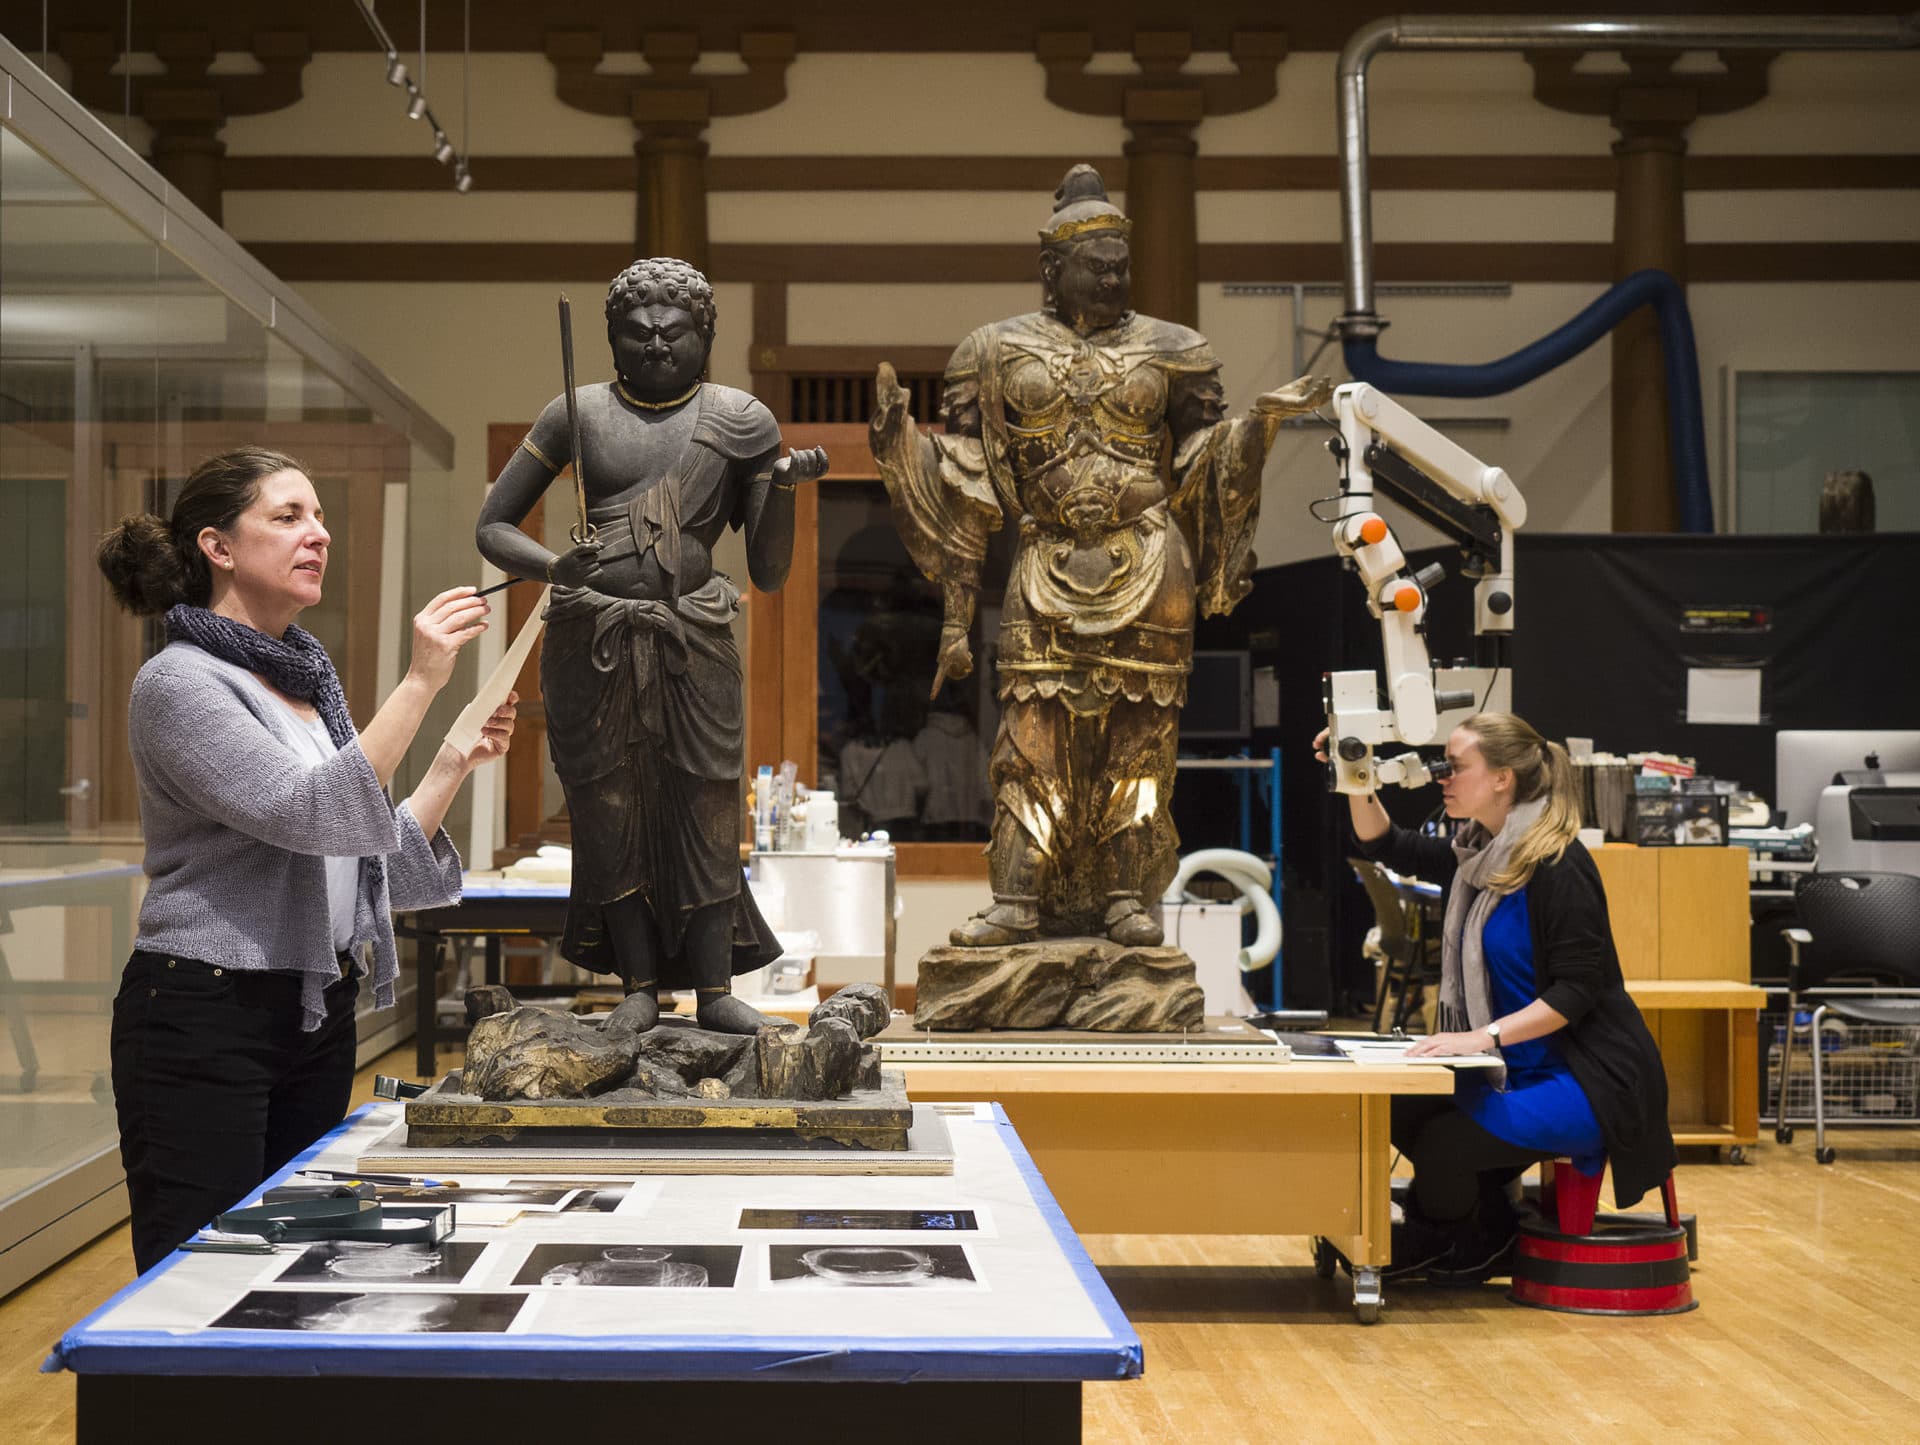 Abby Hykin (left), head of objects conservation, and Eve Mayberger, assistant conservator, examine some of the Japanese Buddhist sculptures as part of Conservation in Action at the MFA. (Courtesy Museum of Fine Arts, Boston)